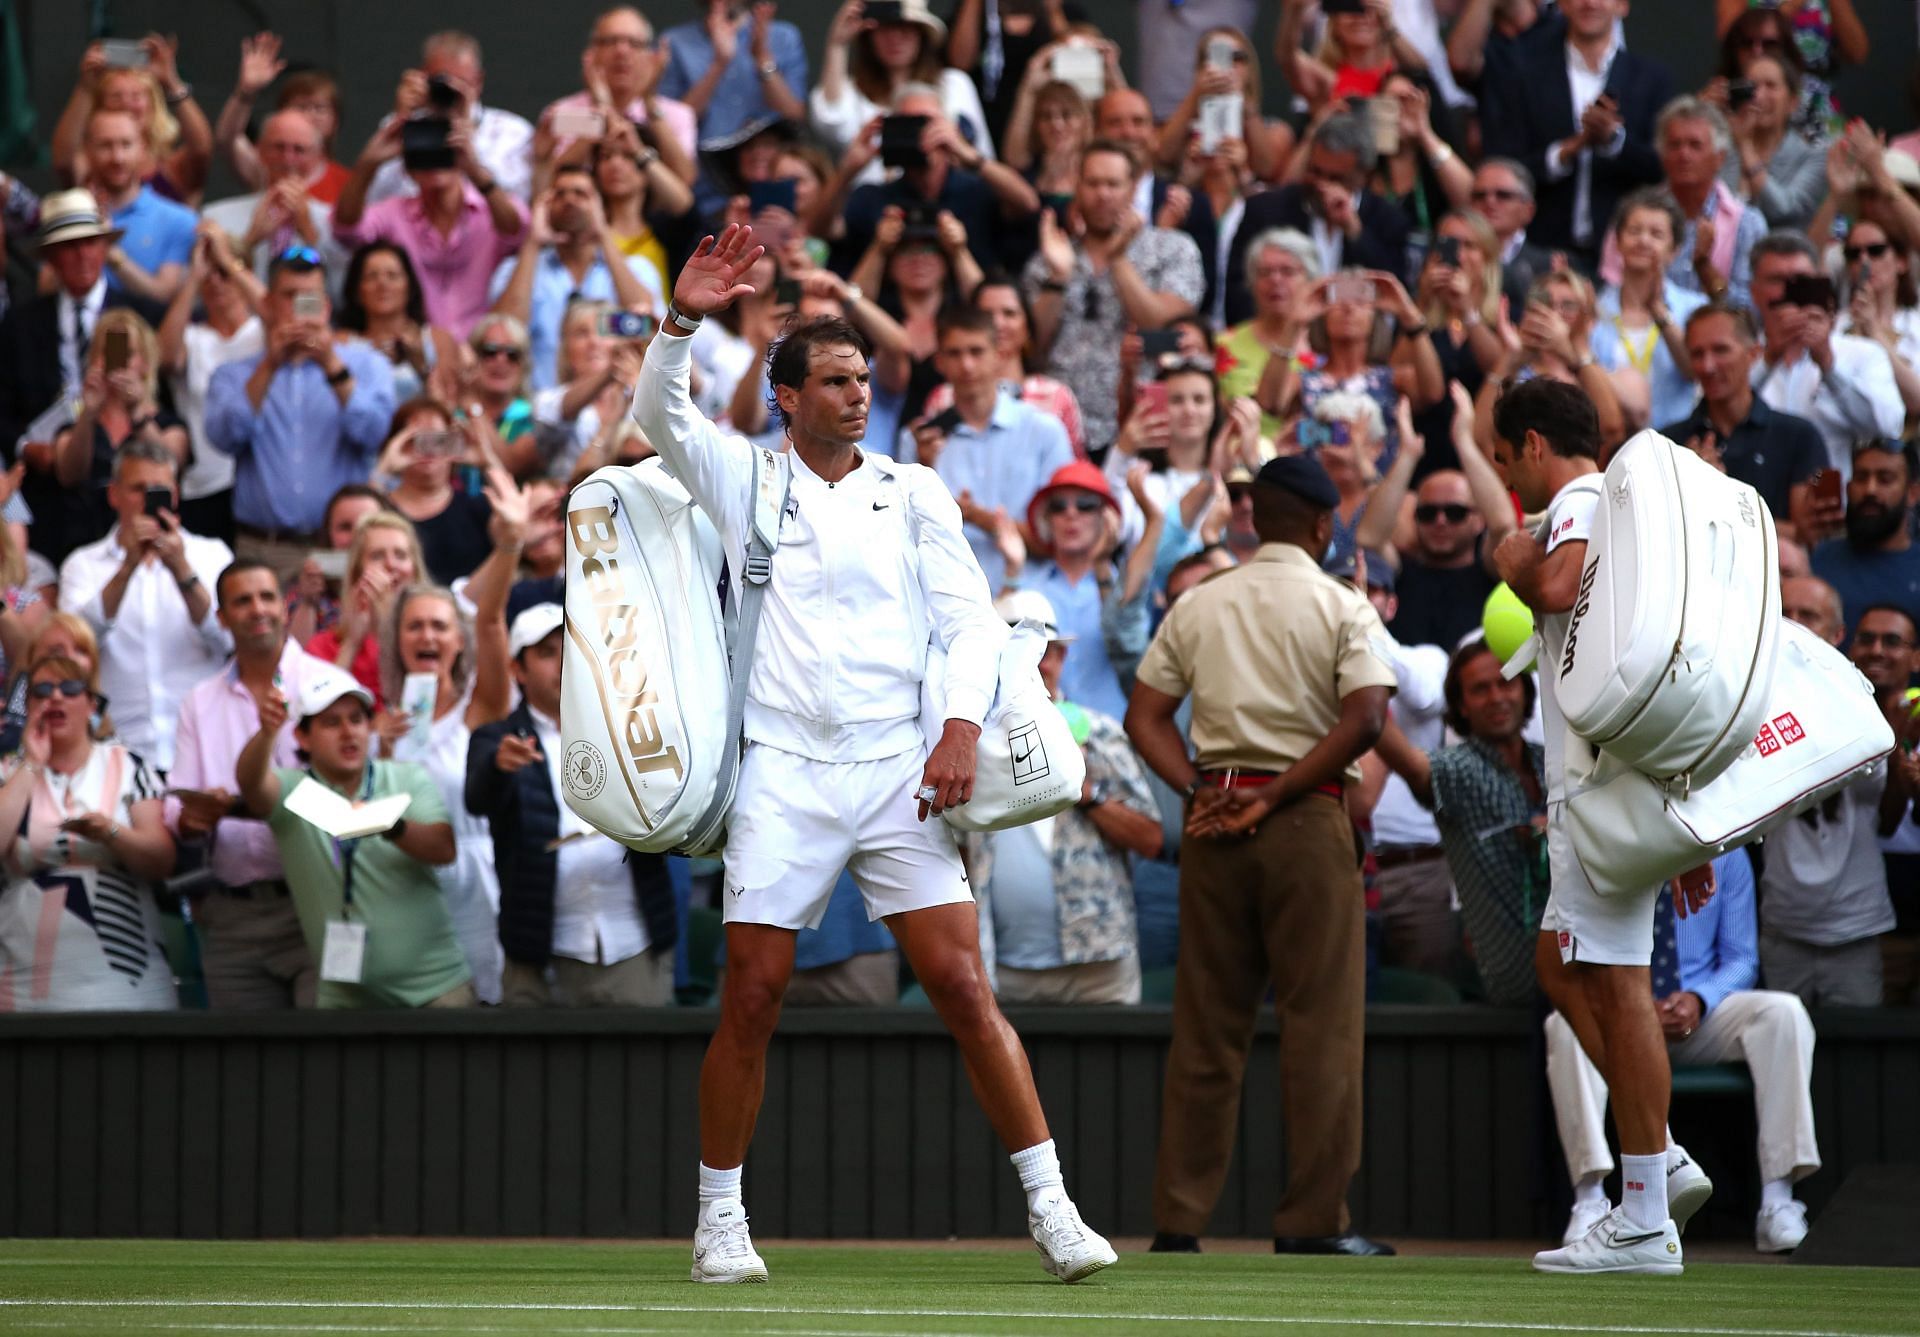 The last time Nadal played in Wimbledon was in 2019 when he lost to Roger Federer in the semifinals.